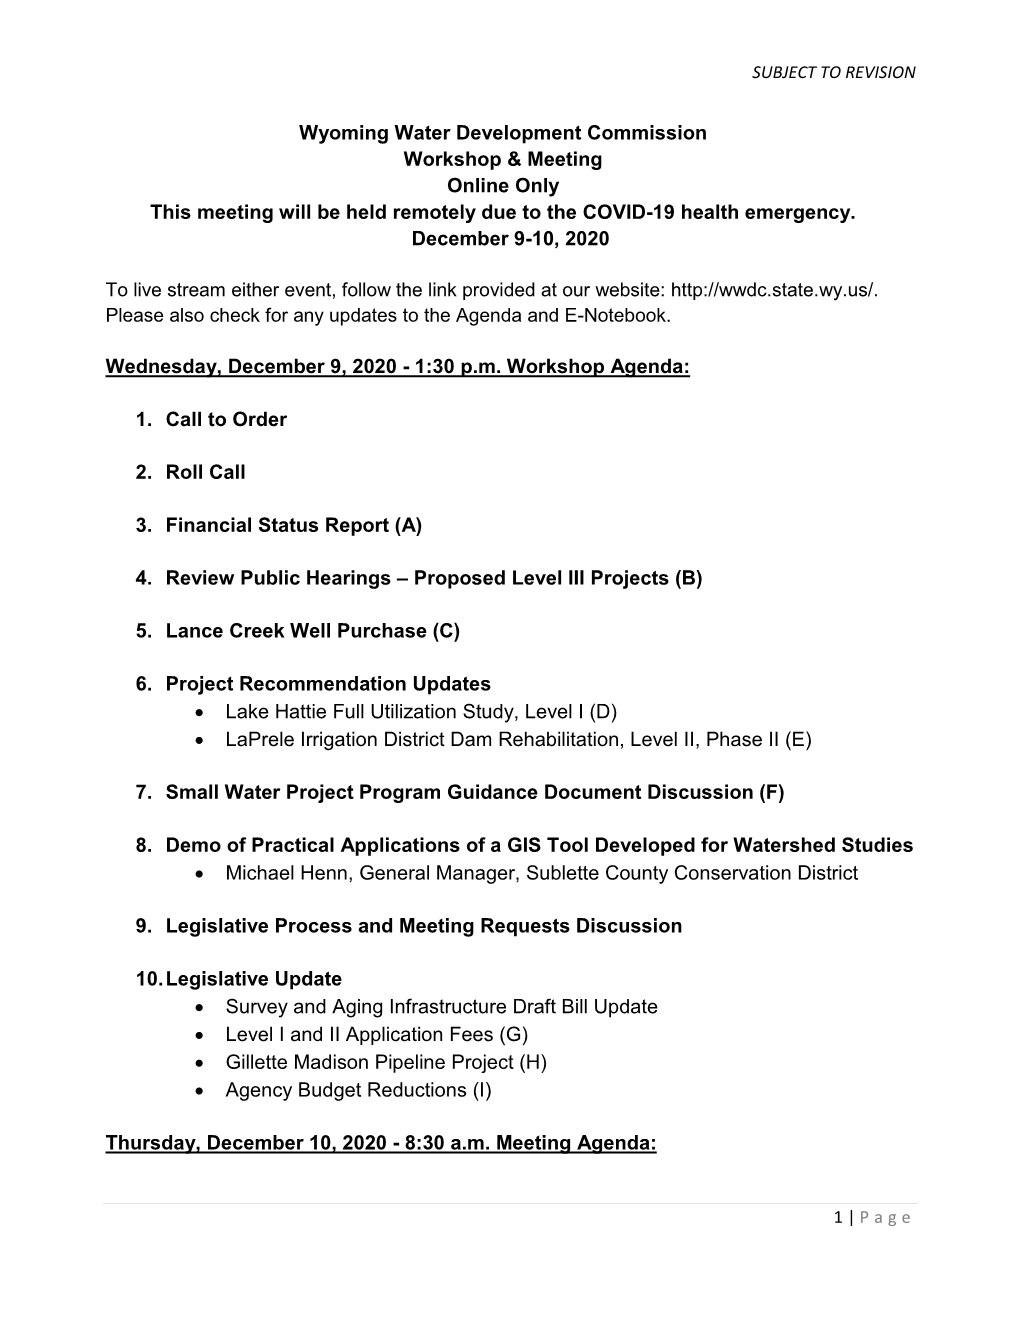 Wyoming Water Development Commission Workshop & Meeting Online Only This Meeting Will Be Held Remotely Due to the COVID-19 H